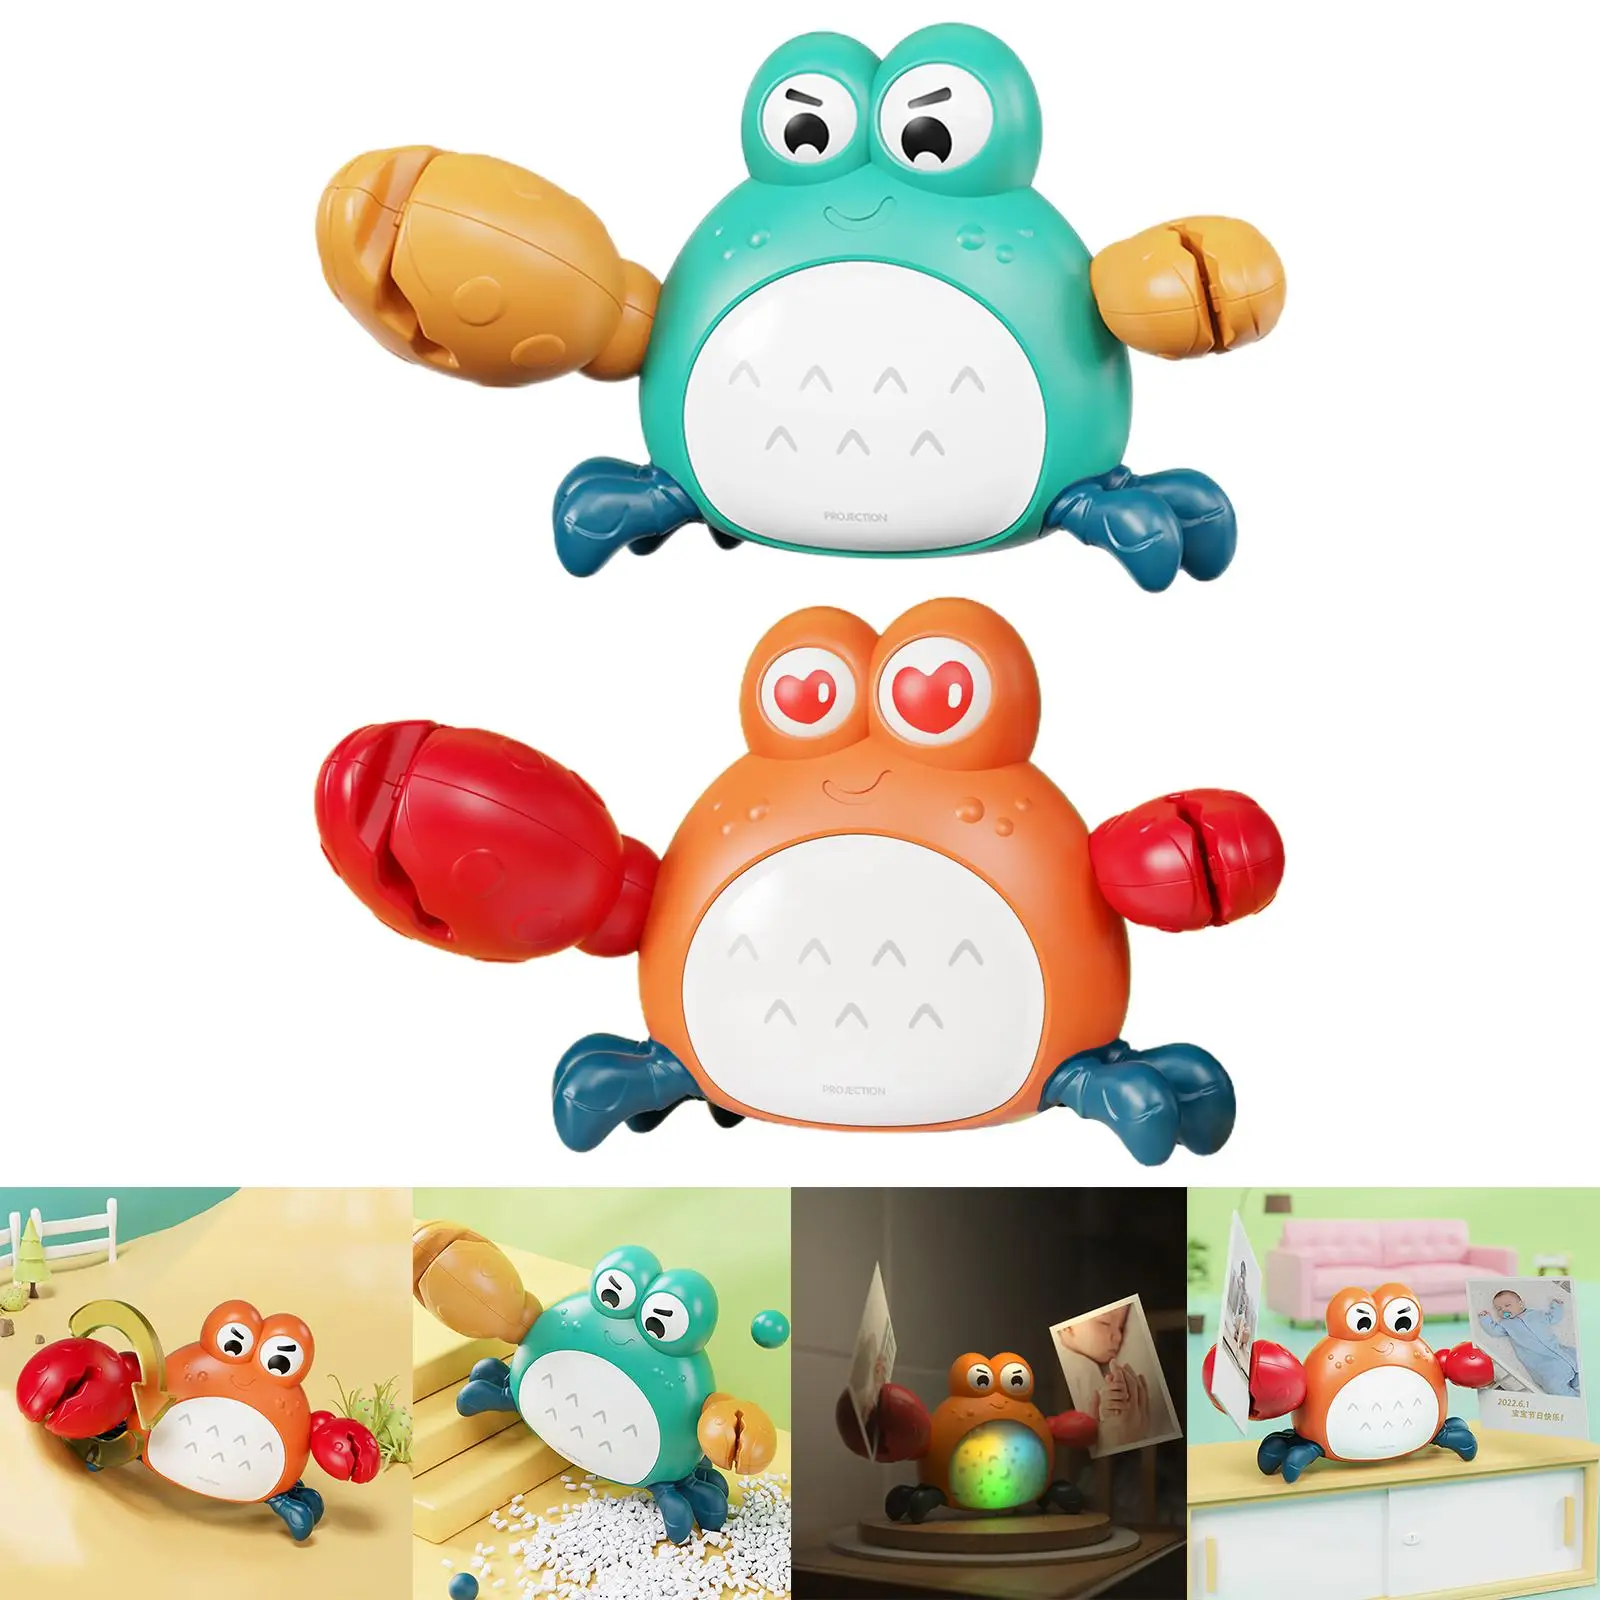 Story Machine Electric Decor Multipurpose Removable Interactive LED Gift Durable Pet Musical Toy for Early Education Kids